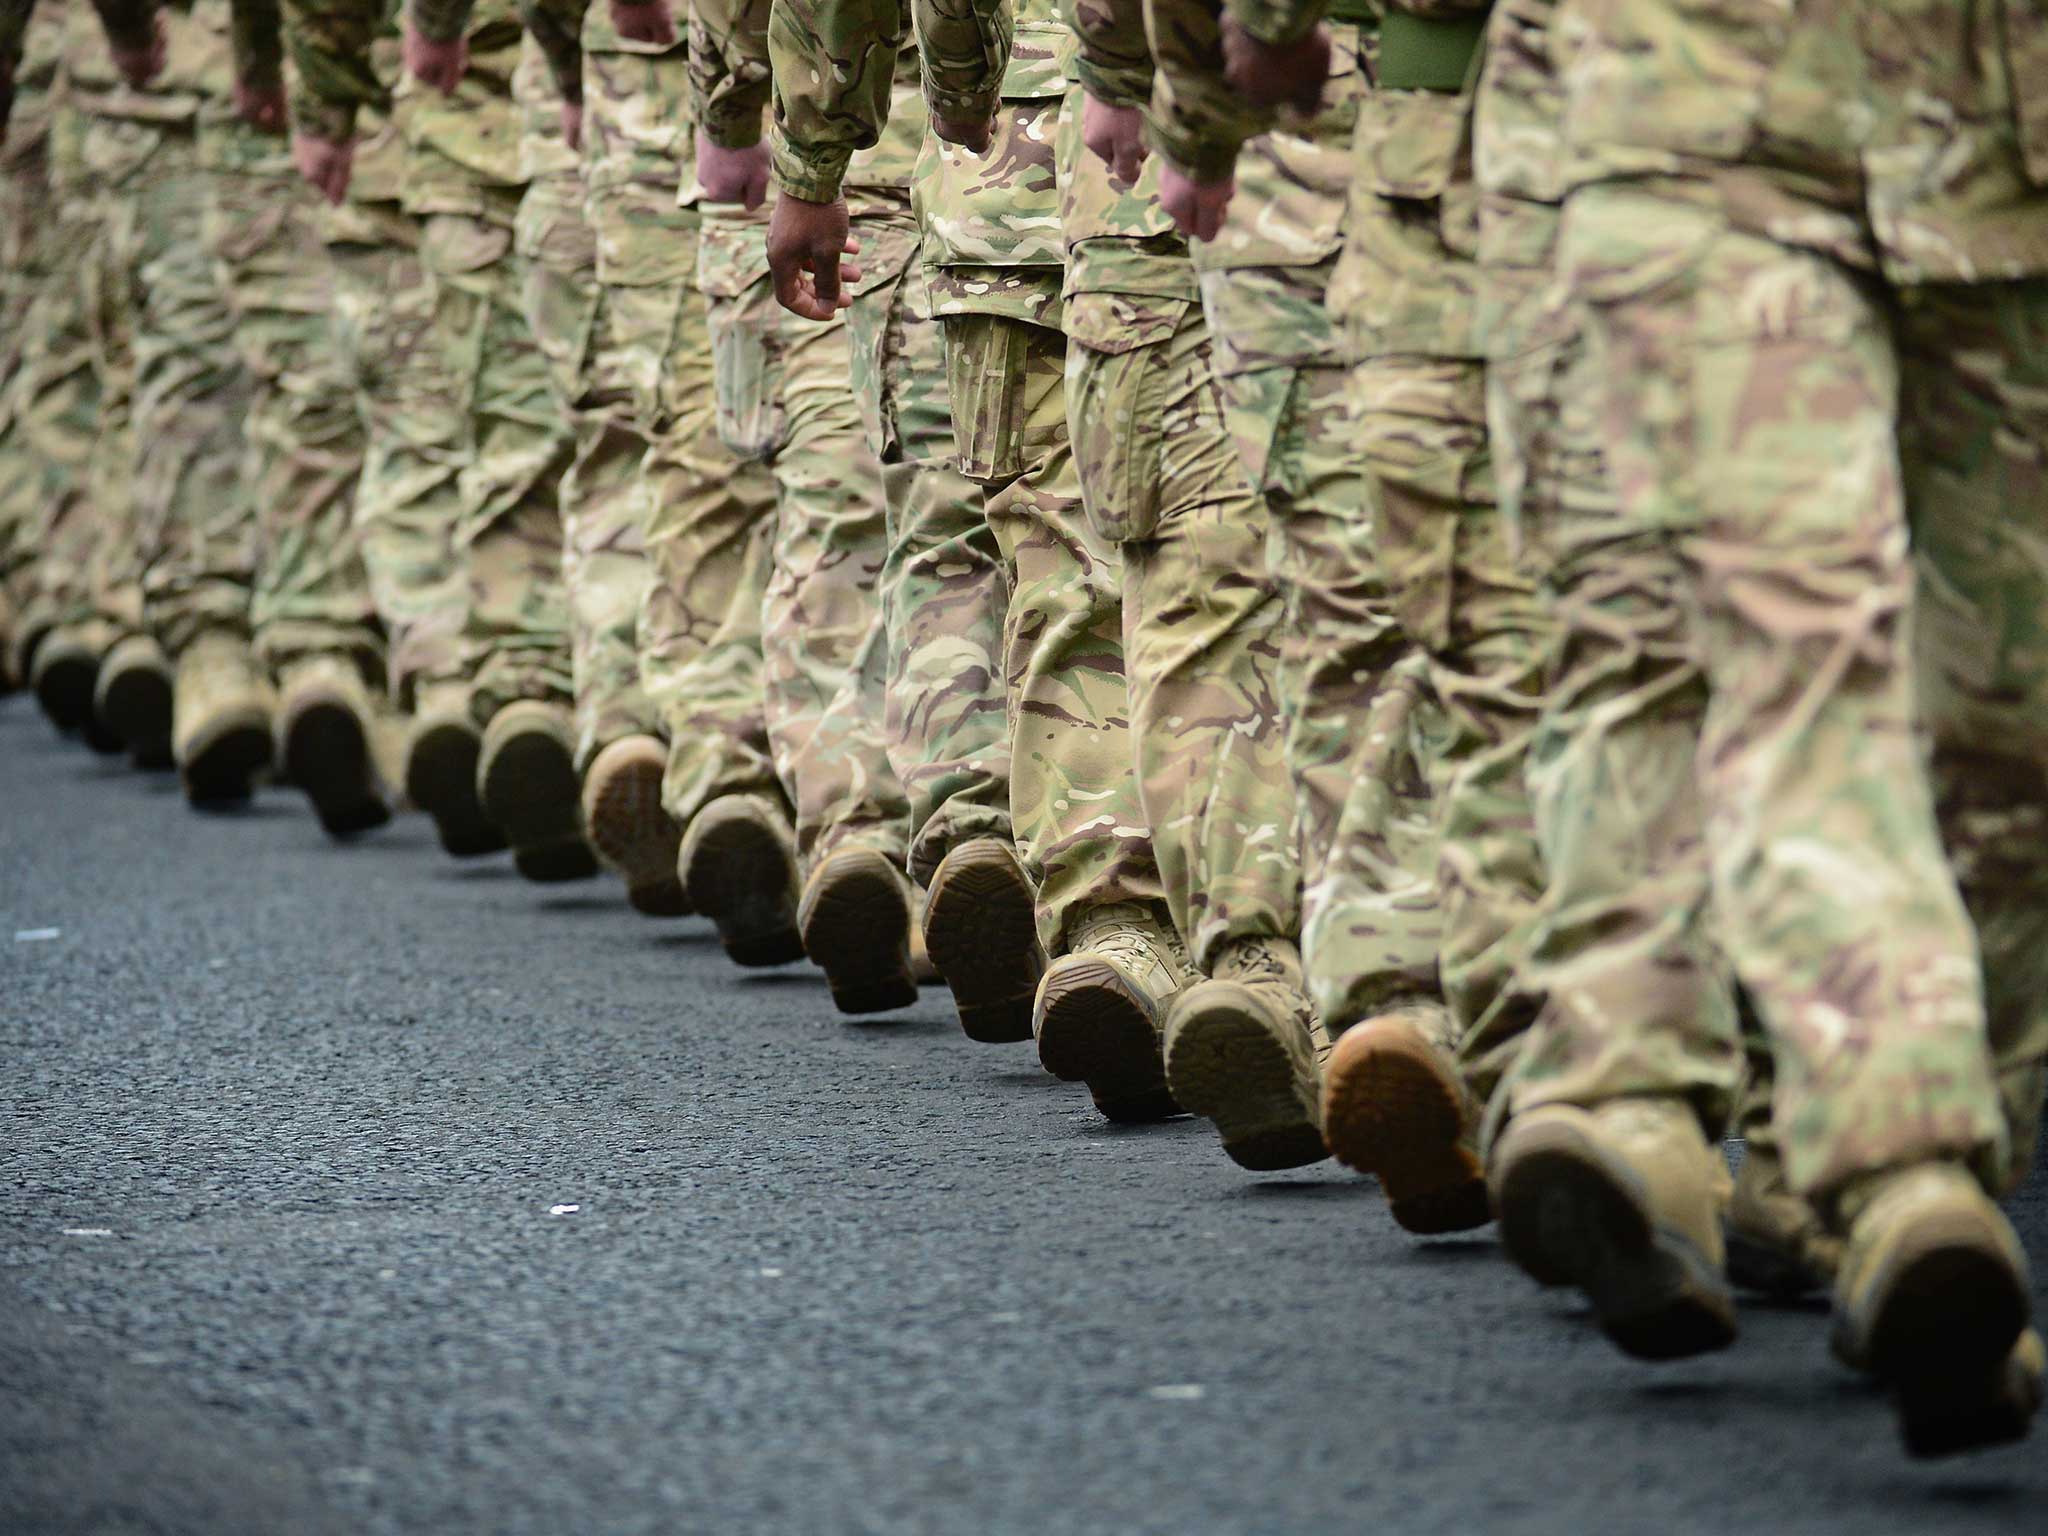 The percentage of Muslims joining the British Army has been consistently lower than those of other religions